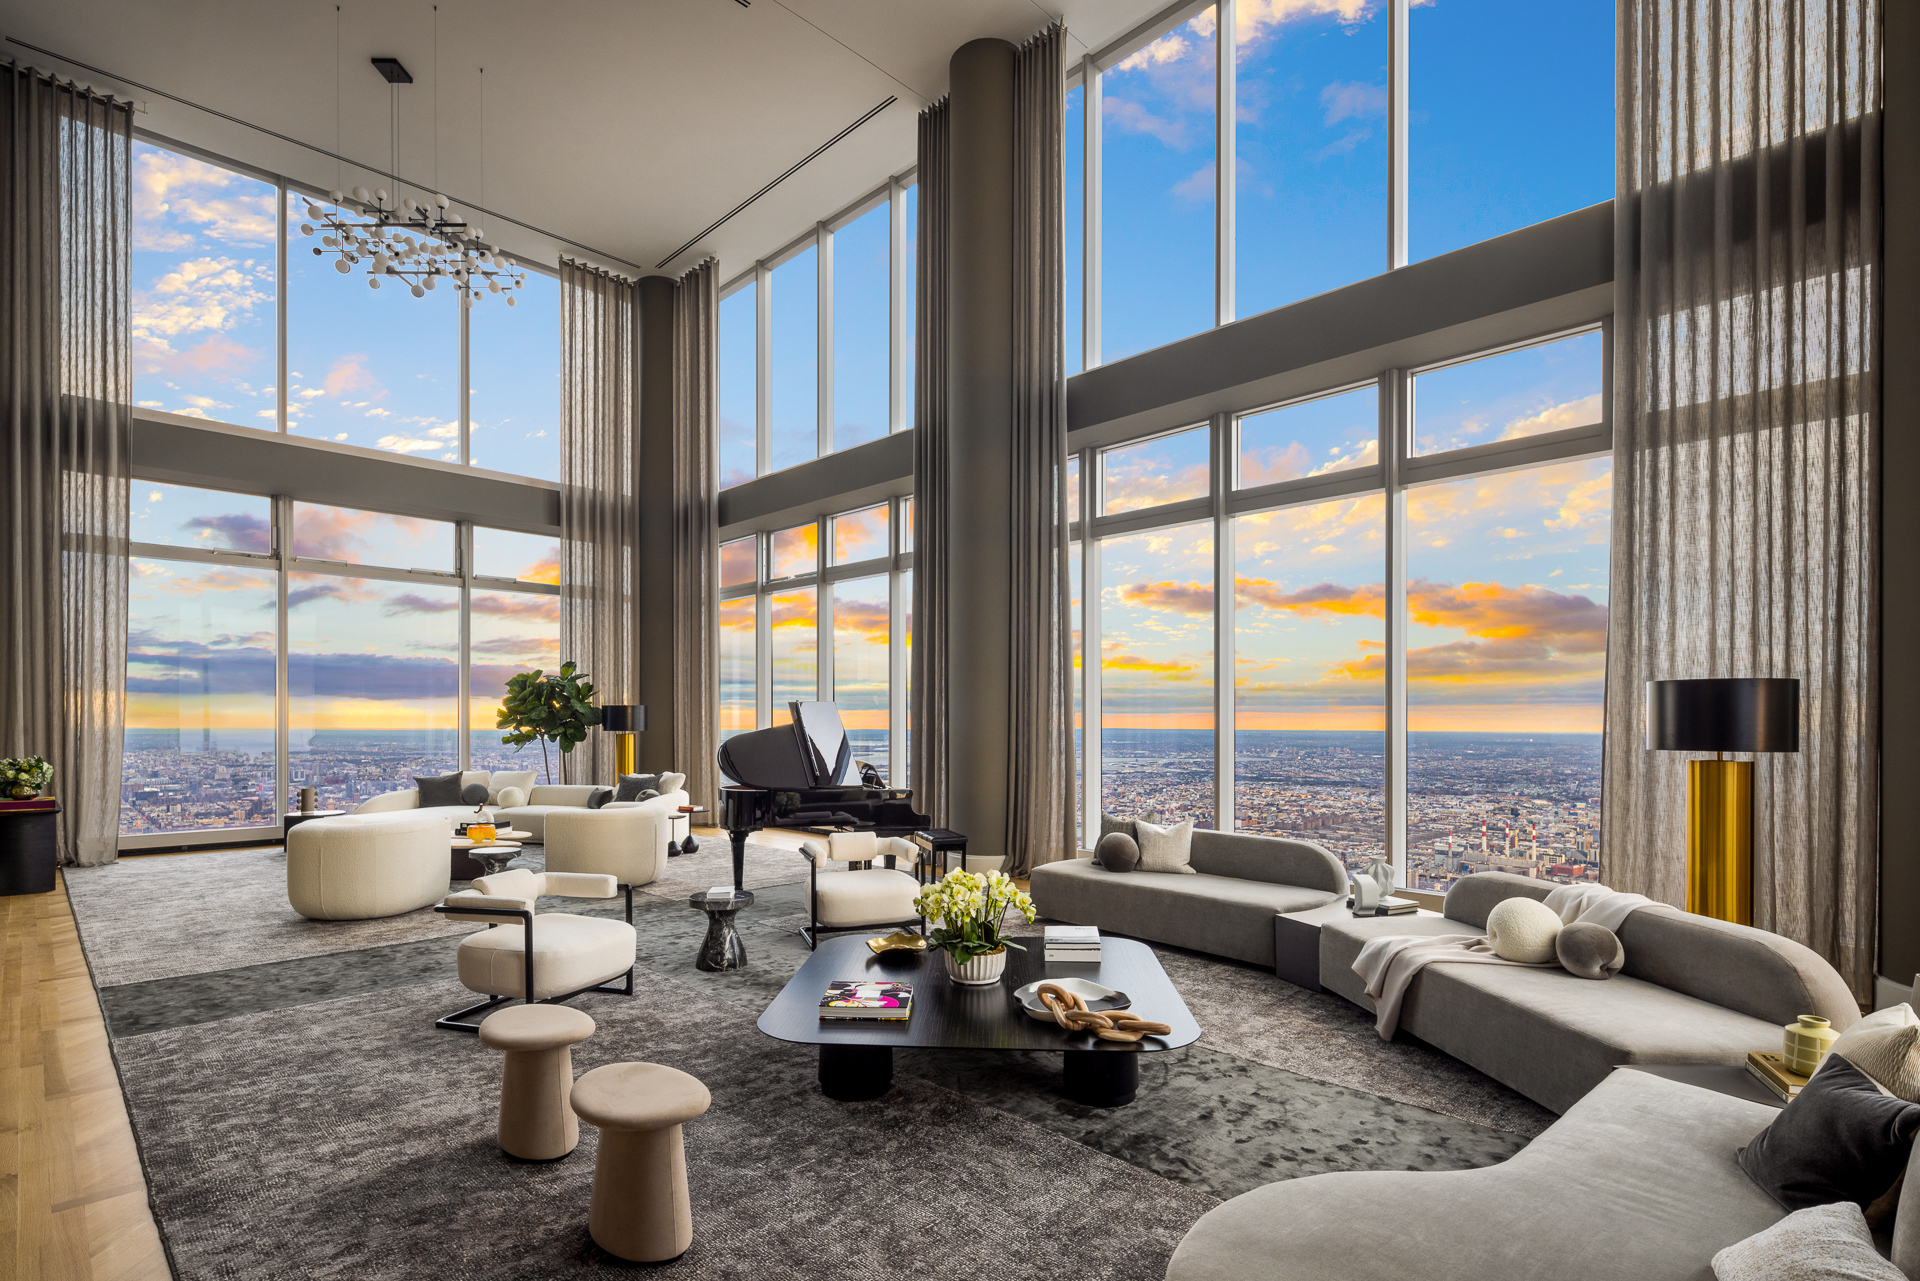 217 57th Street, New York, New York 10019, 7 Bedrooms Bedrooms, 23 Rooms Rooms,11 BathroomsBathrooms,Residential,For Sale,Central Park Tower,57th,PRCH-3947296